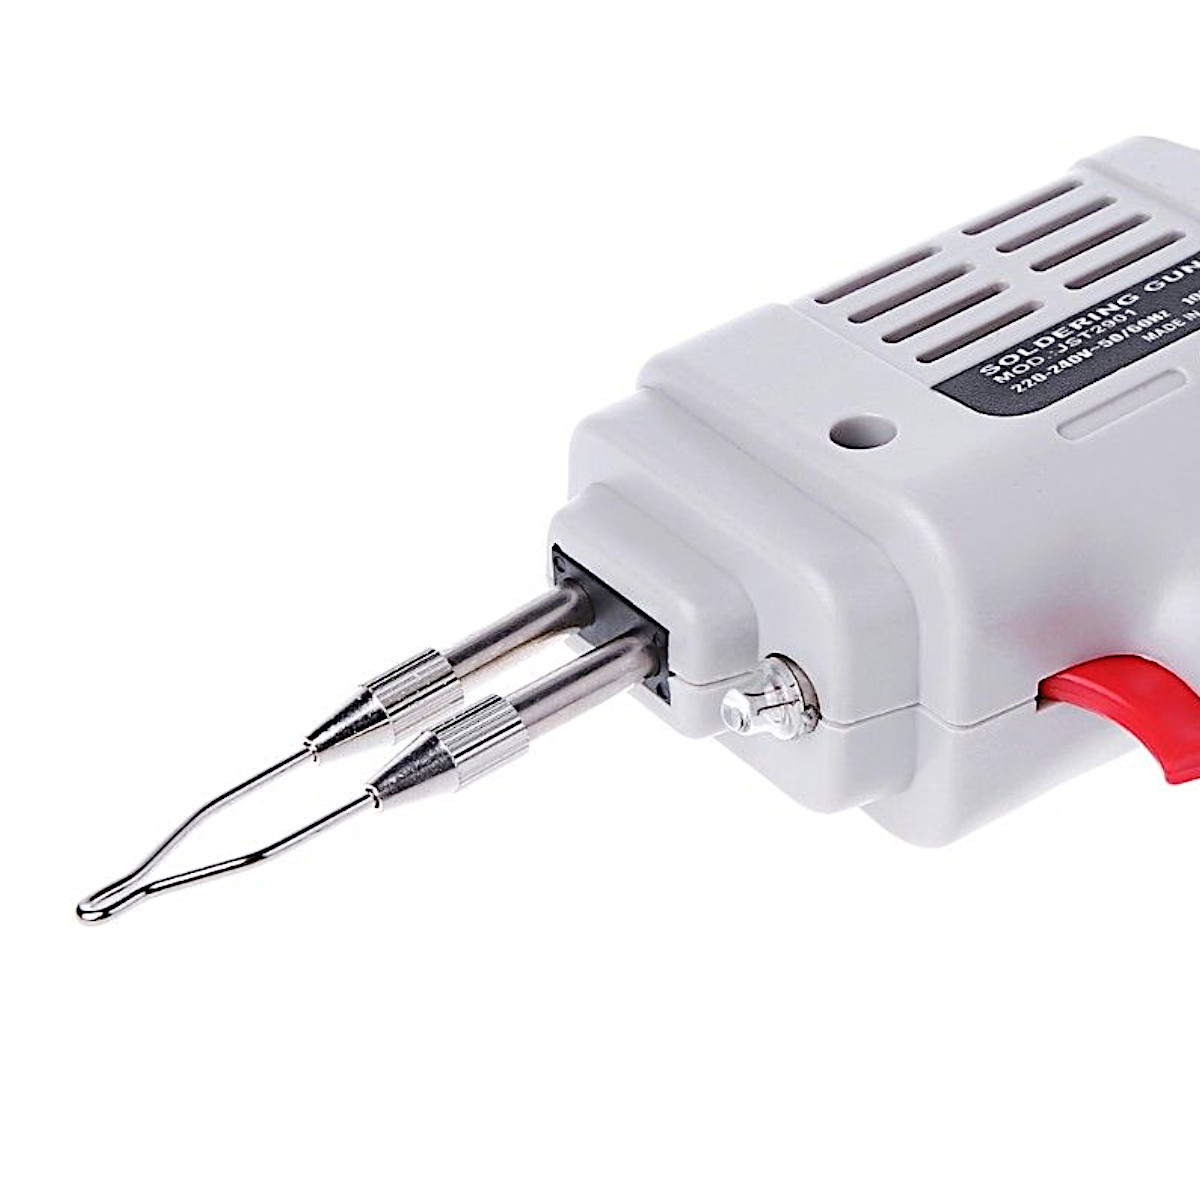 100W-220V-to-240V-Electrical-Soldering-Iron-Fast-Electric-Welding-Solder-Tool-EU-Plug-1393550-7